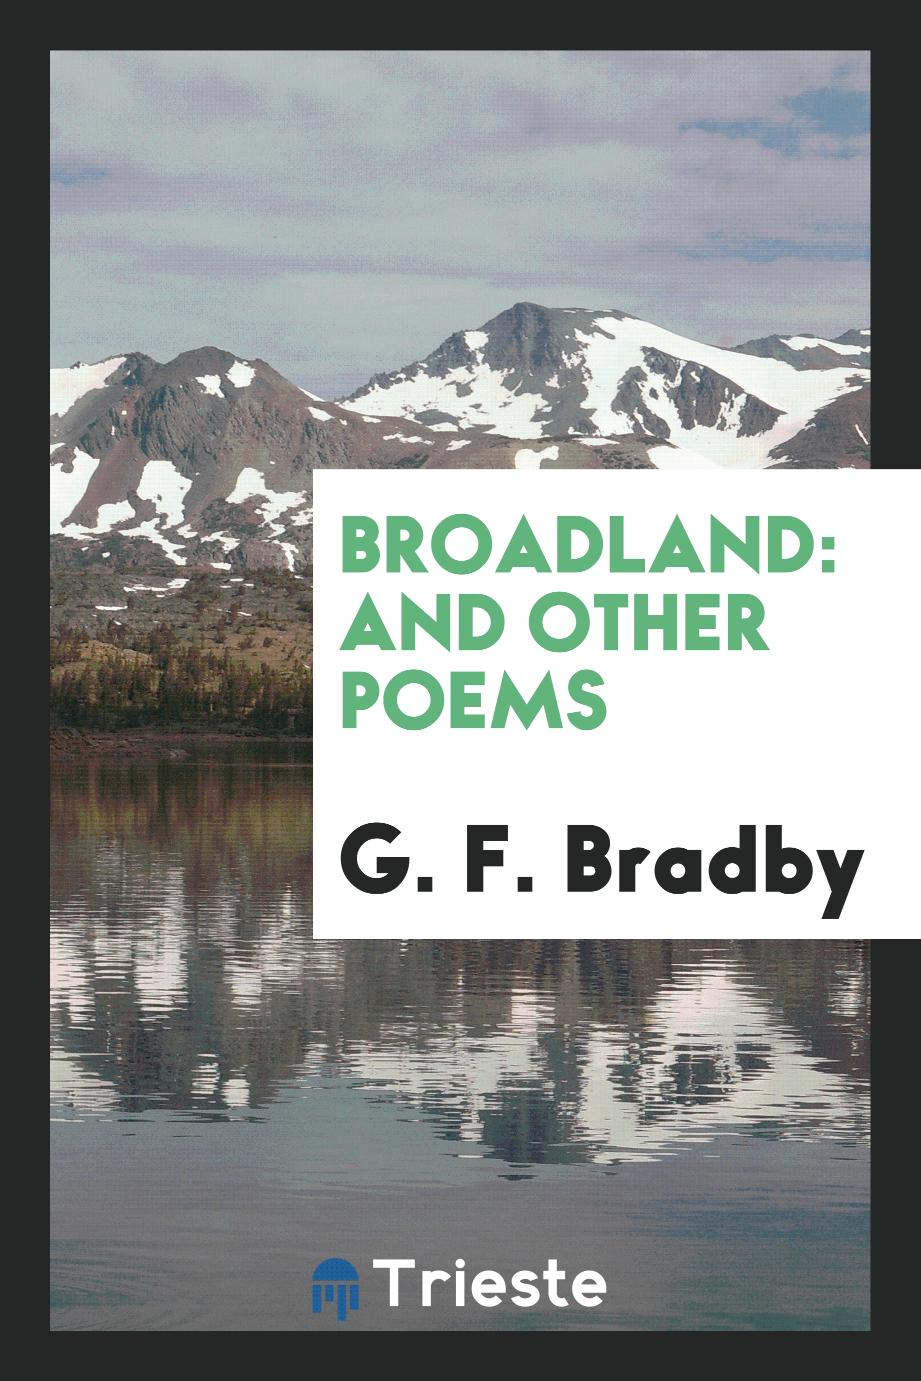 Broadland: and other poems